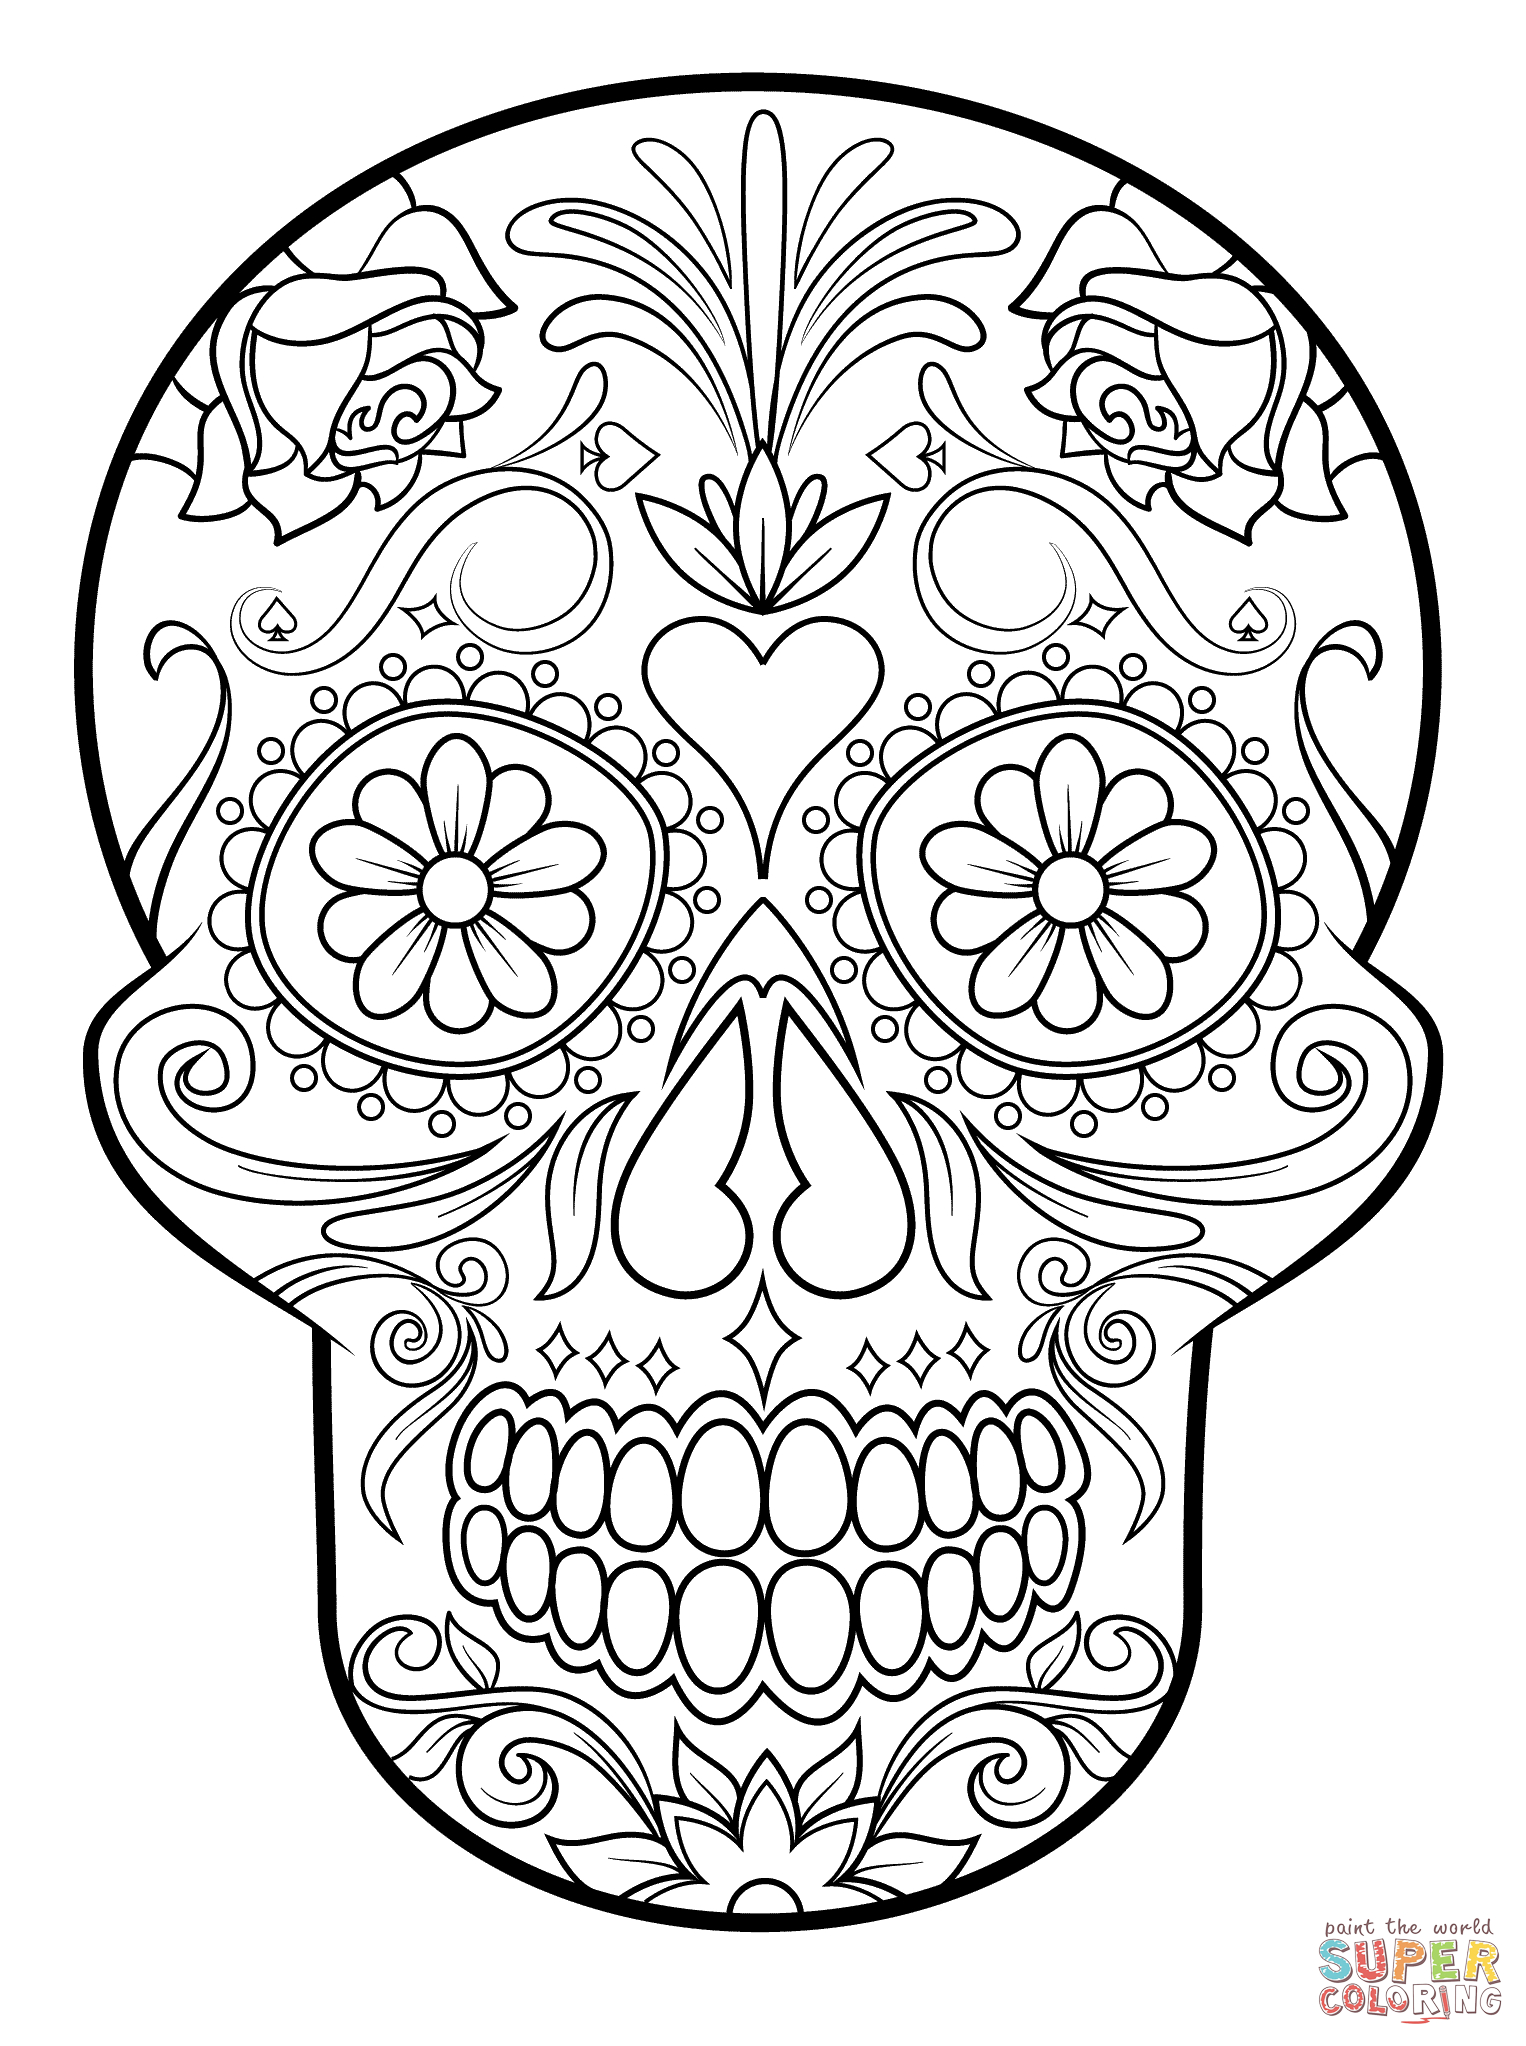 Coloring Pages : Sugar Skull Coloring Page Free Printable Pages For - Free Printable Sugar Skull Coloring Pages